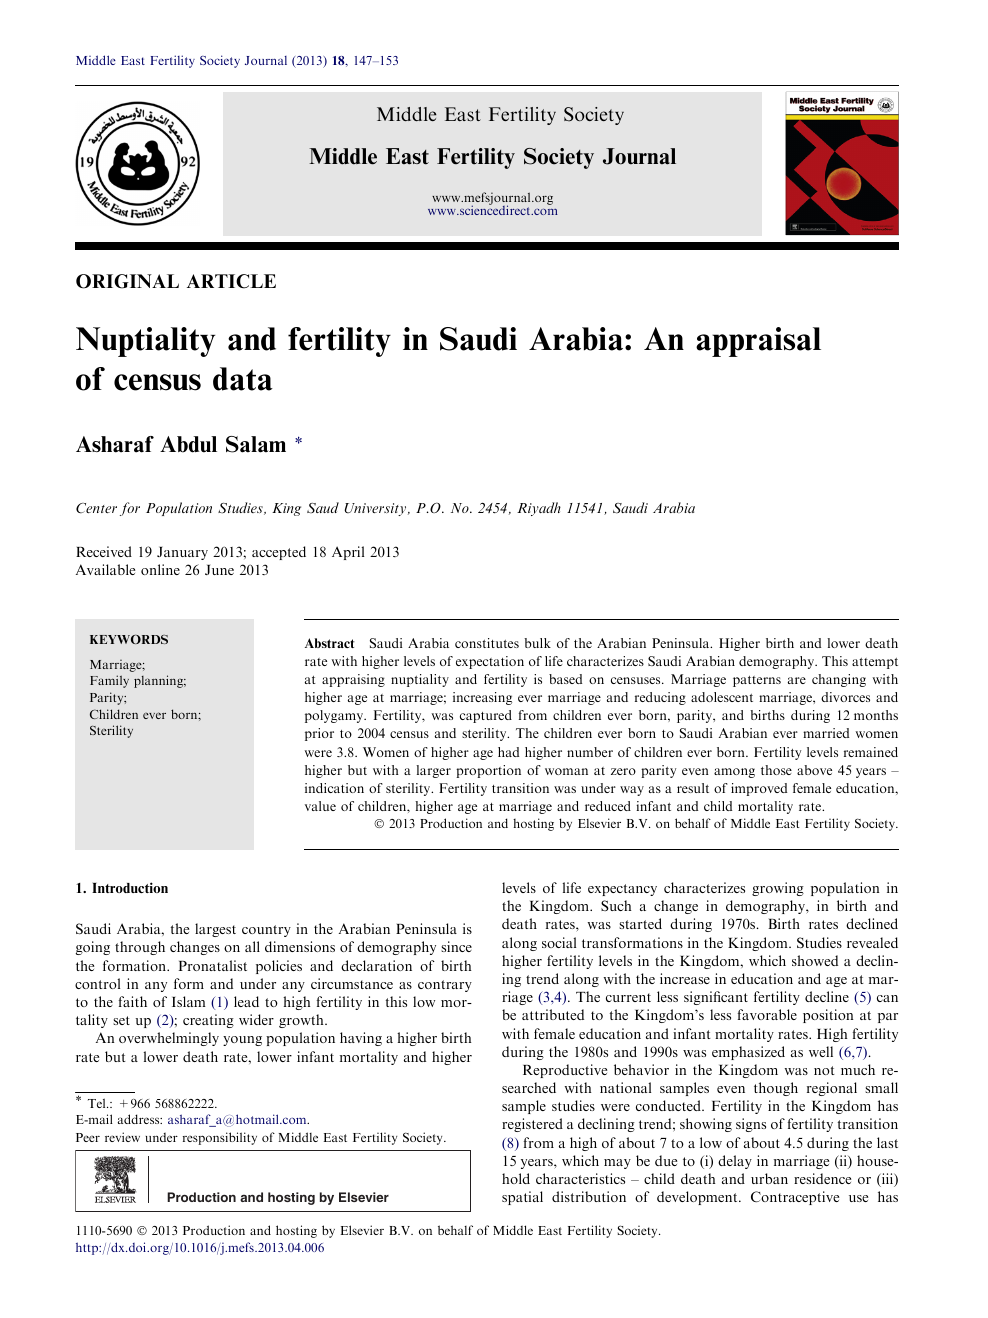 Nuptiality And Fertility In Saudi Arabia An Appraisal Of Census Data Topic Of Research Paper In Health Sciences Download Scholarly Article Pdf And Read For Free On Cyberleninka Open Science Hub